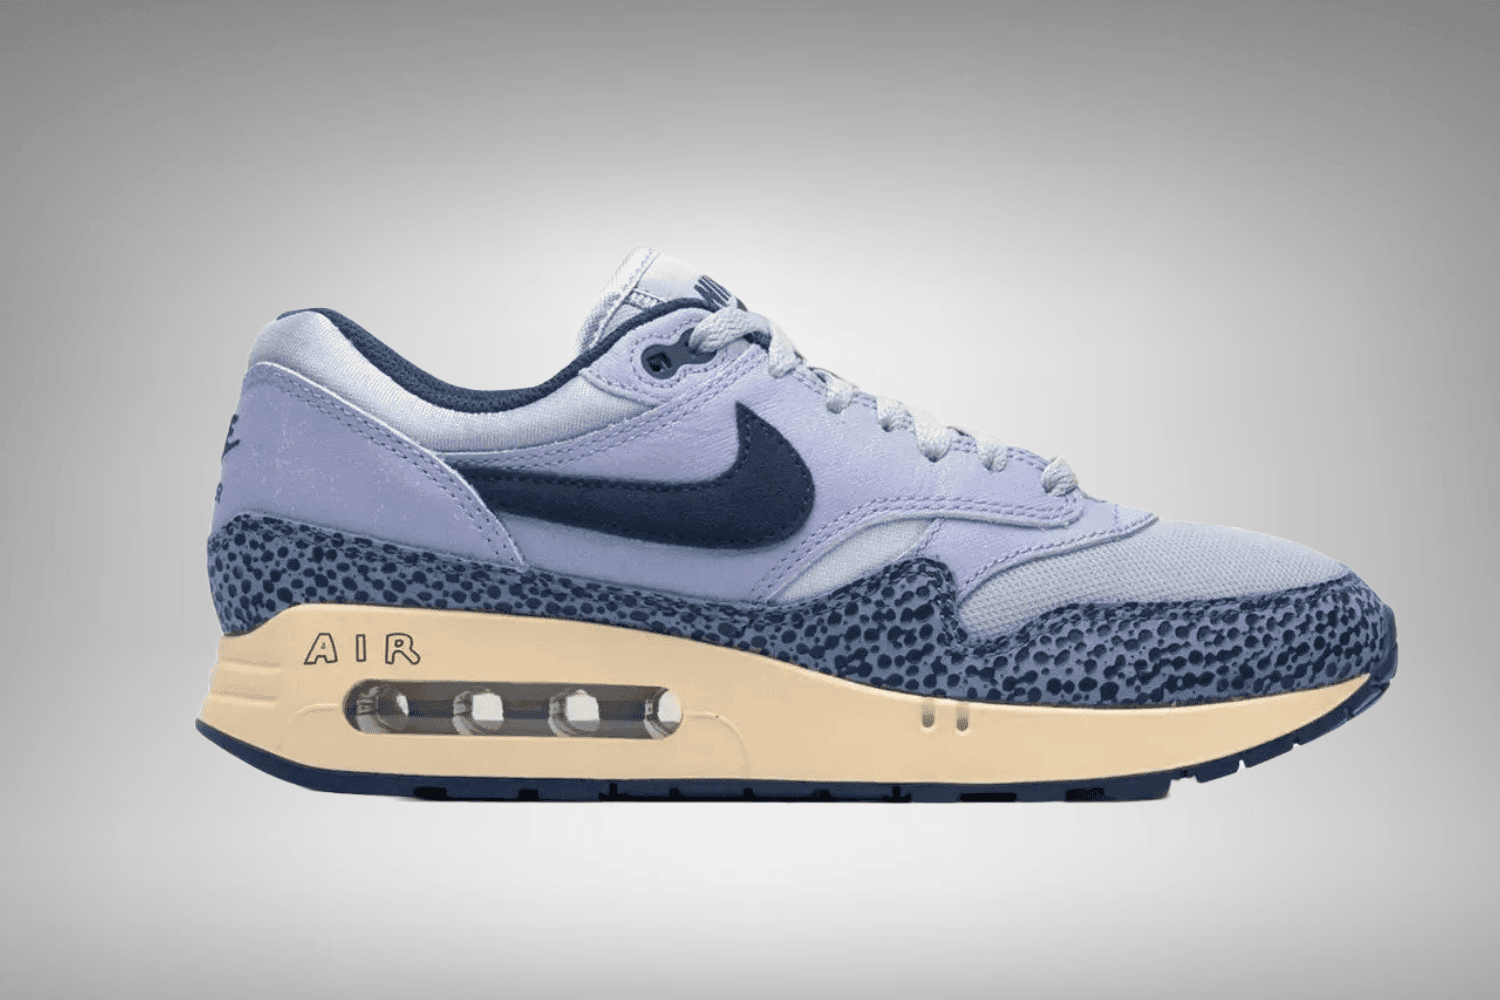 The Nike Air Max 1 '86 appears in a 'Blue Safari' colorway